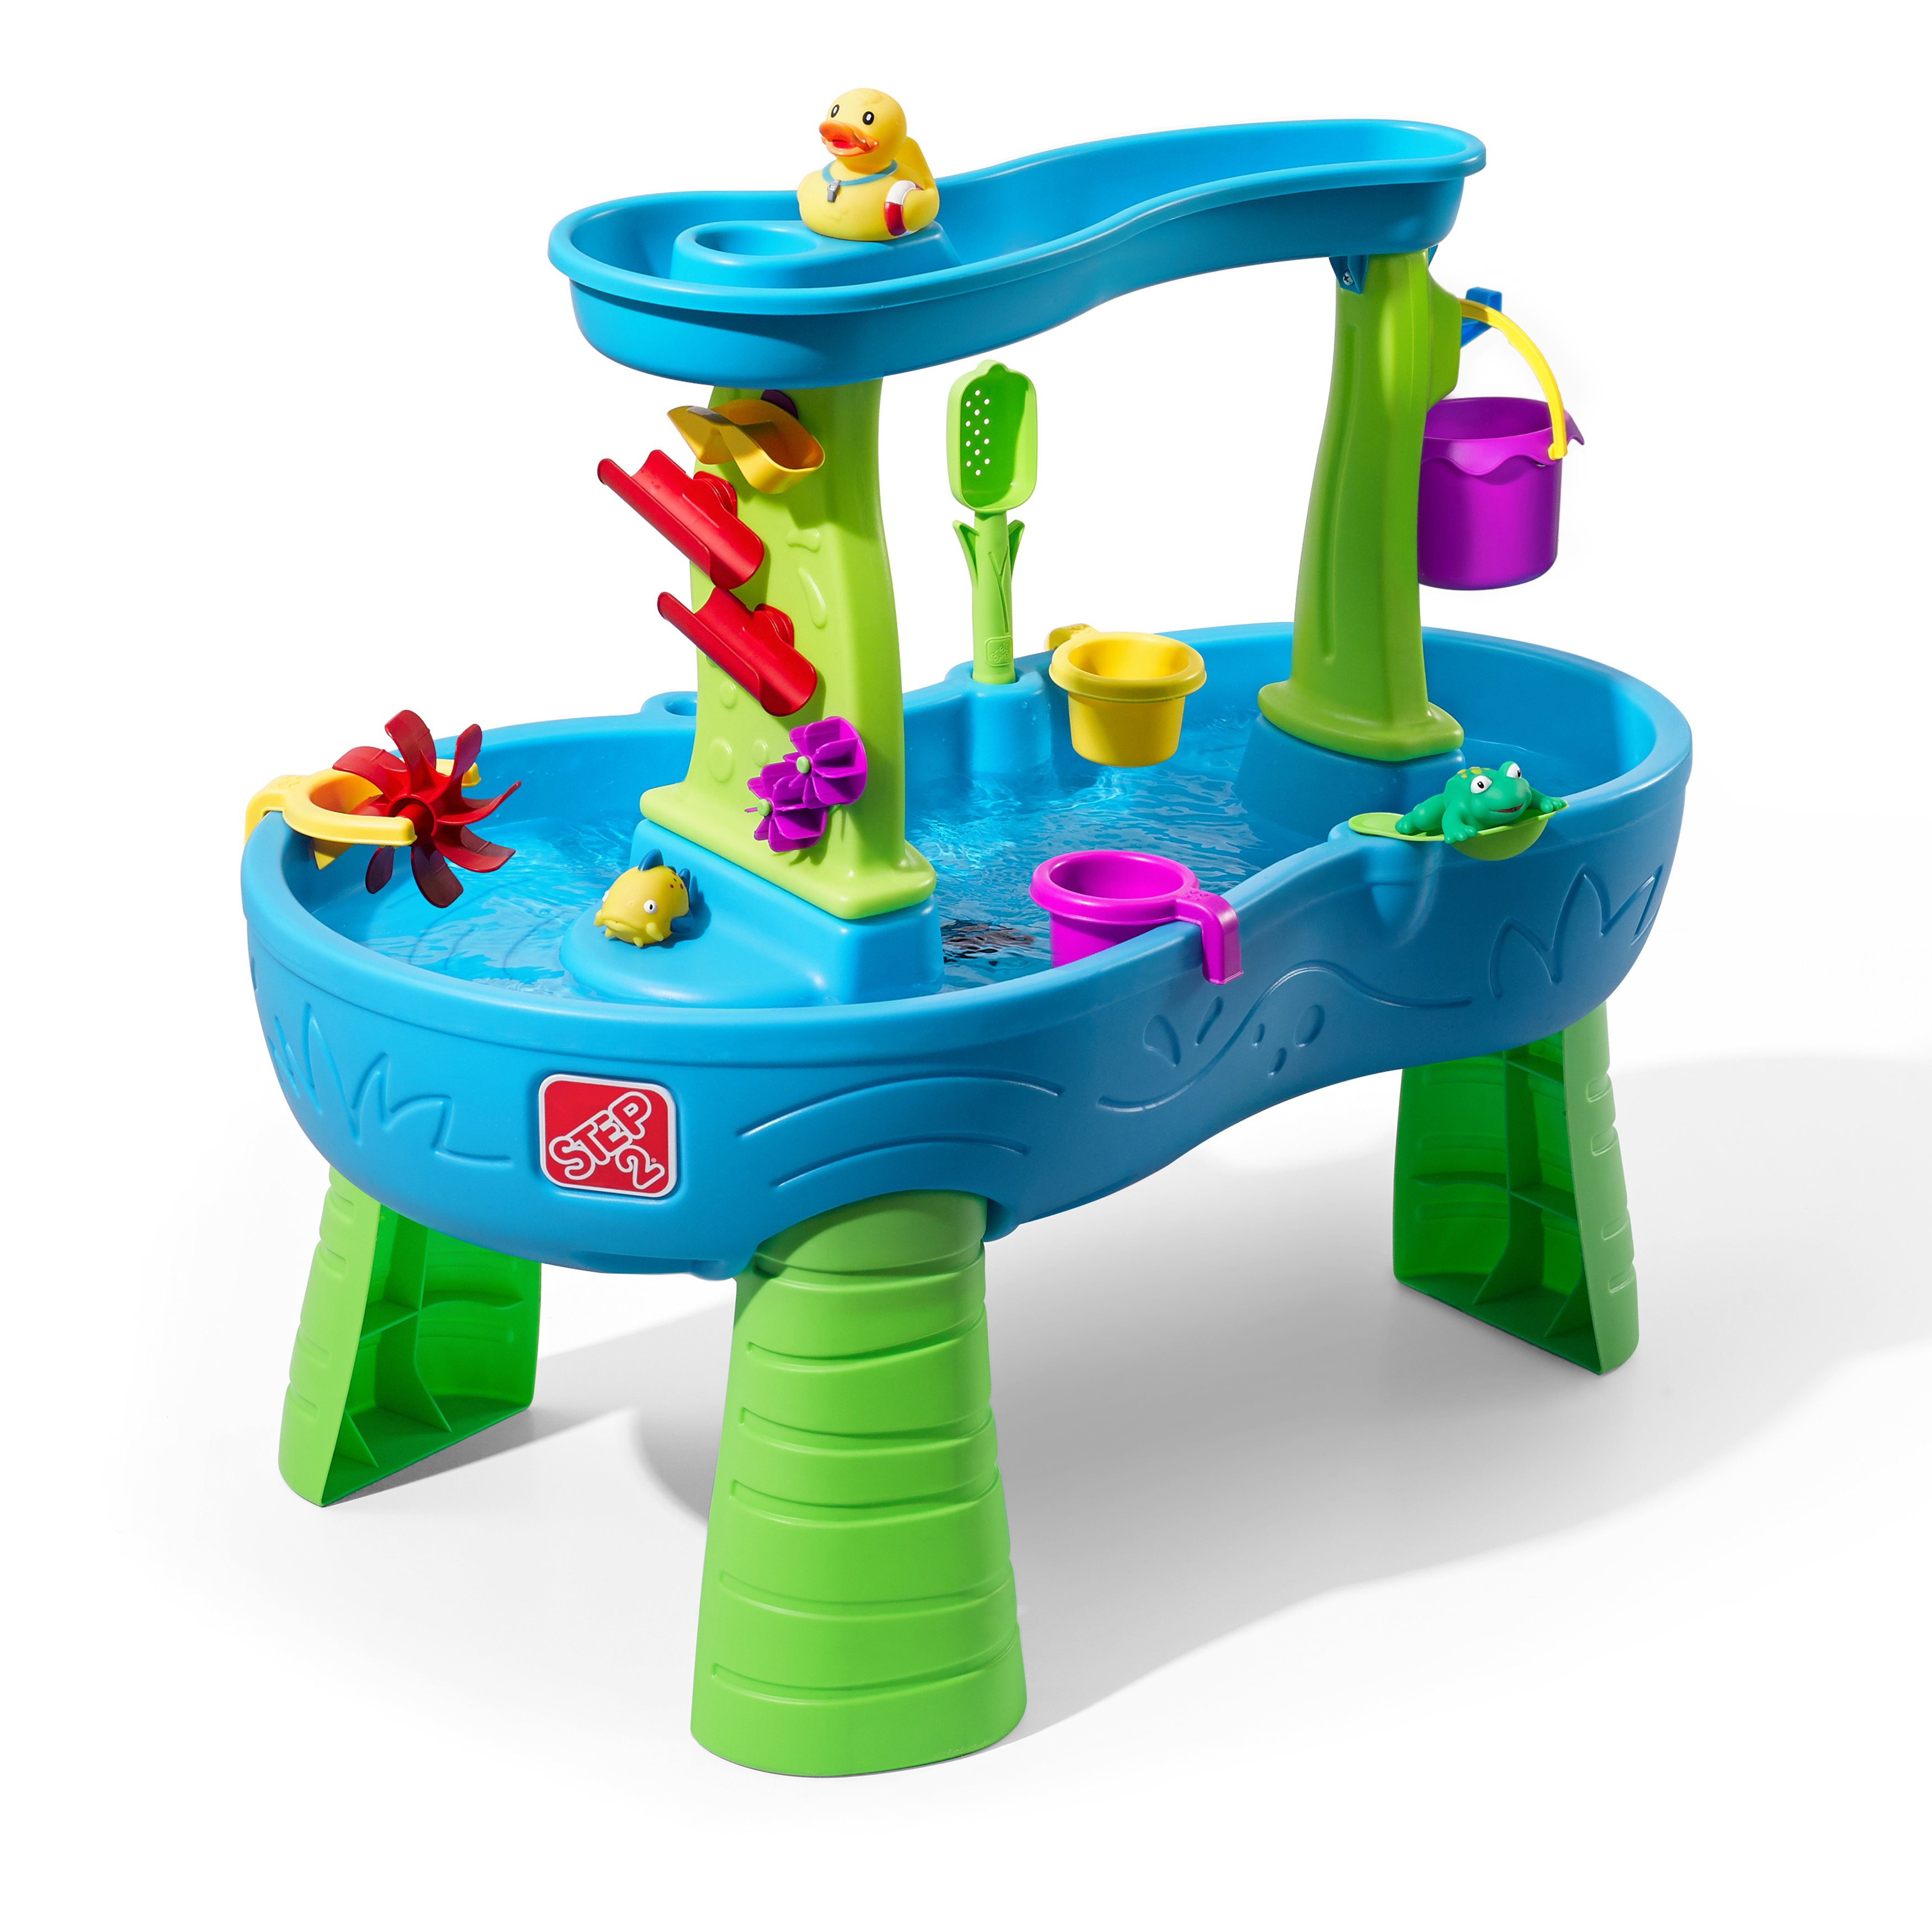 Step2 Rain Showers Splash Pond Blue Plastic Water Table for Toddlers - image 4 of 14